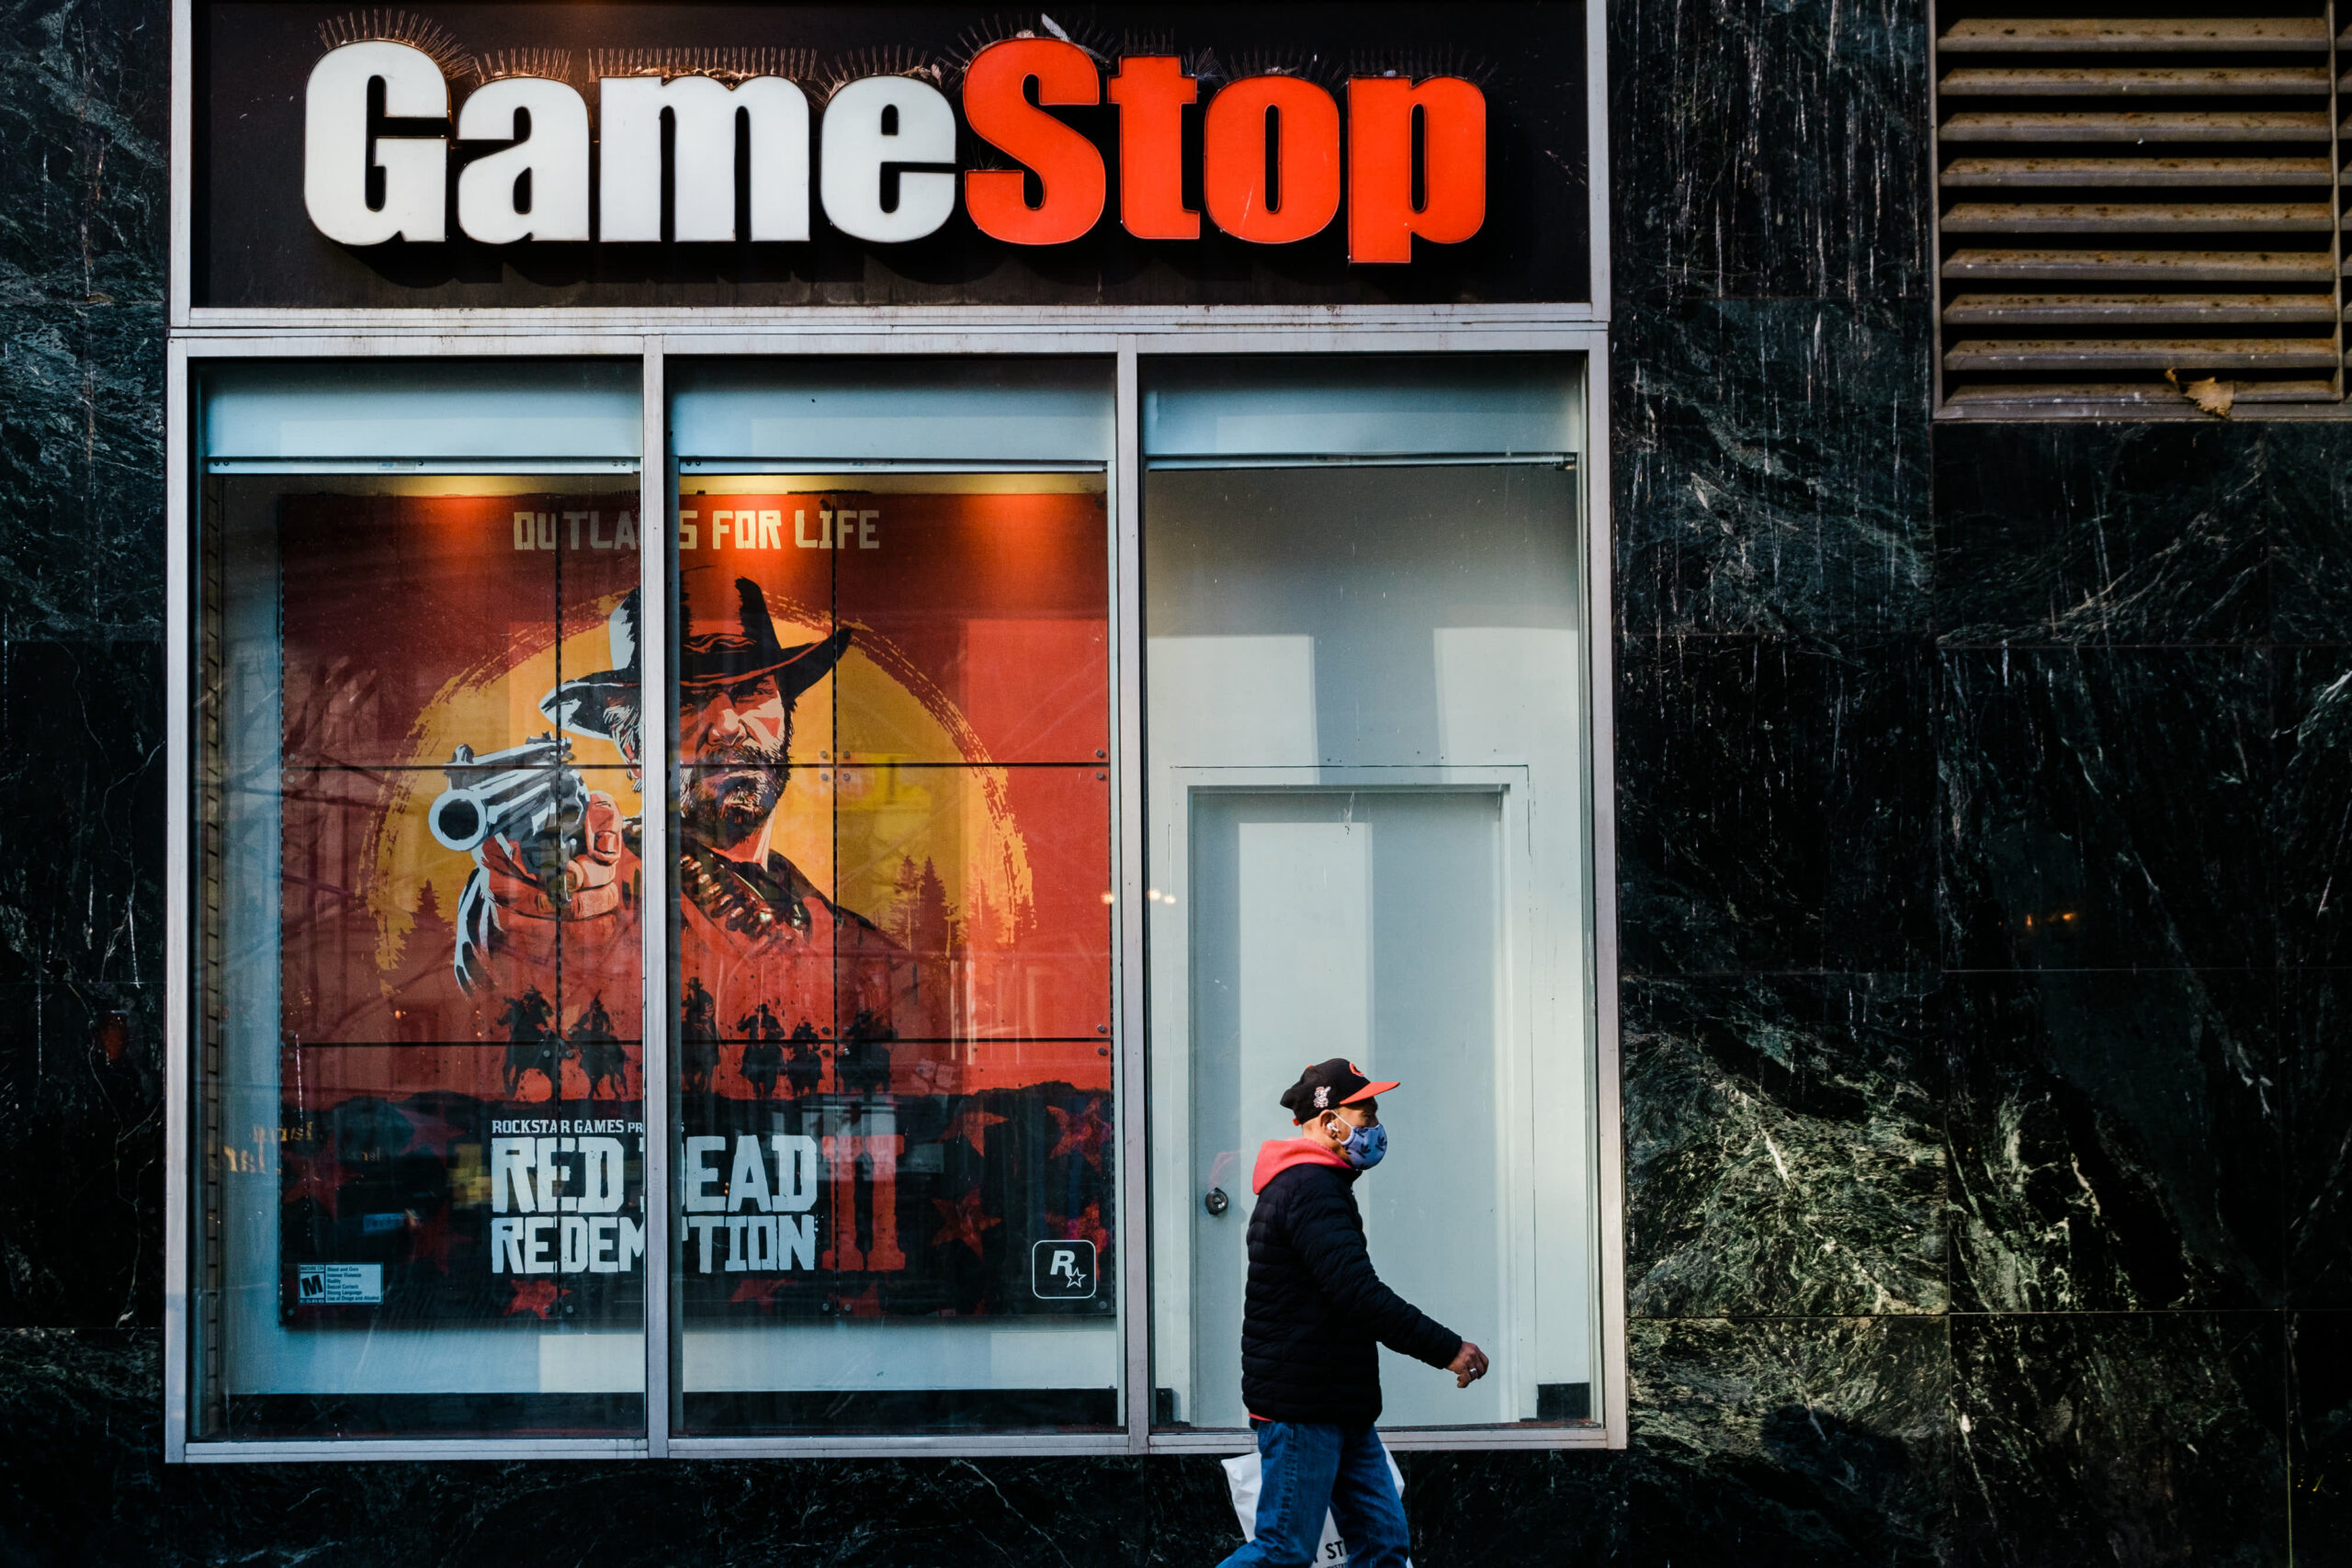 Stimulus checks unlikely to spur one other GameStop mania, says BofA